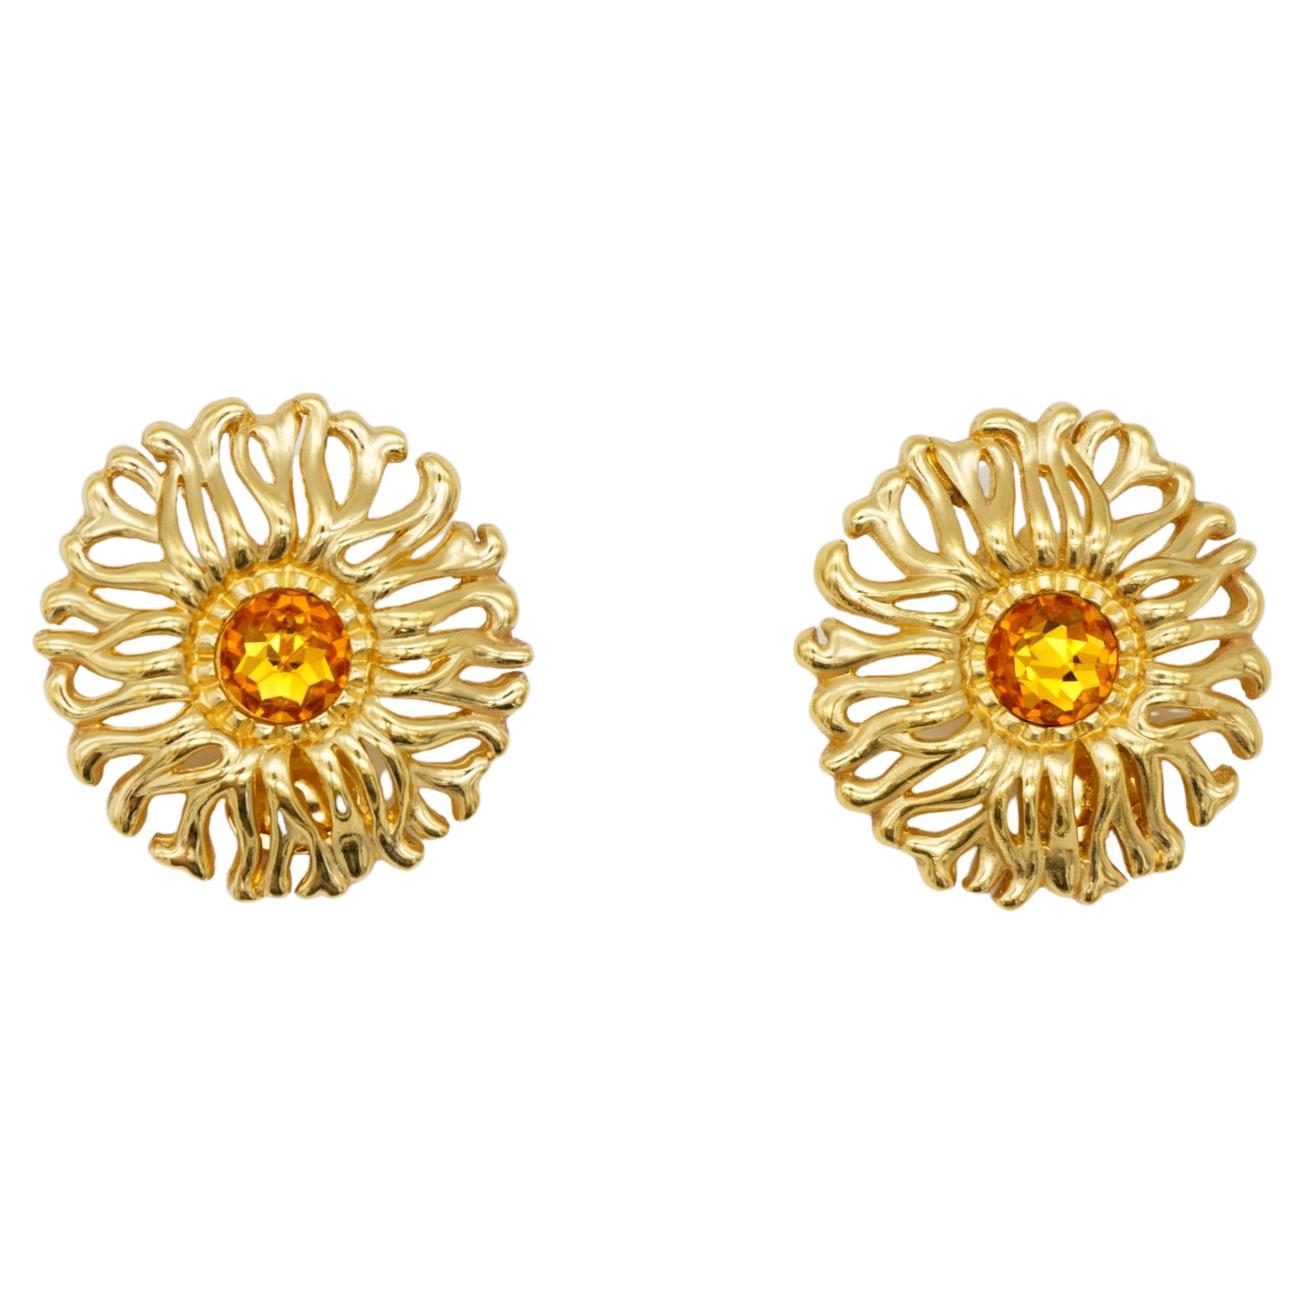 Christian Dior 1980s Vintage Extra Large Yellow Crystal Openwork Round Earrings